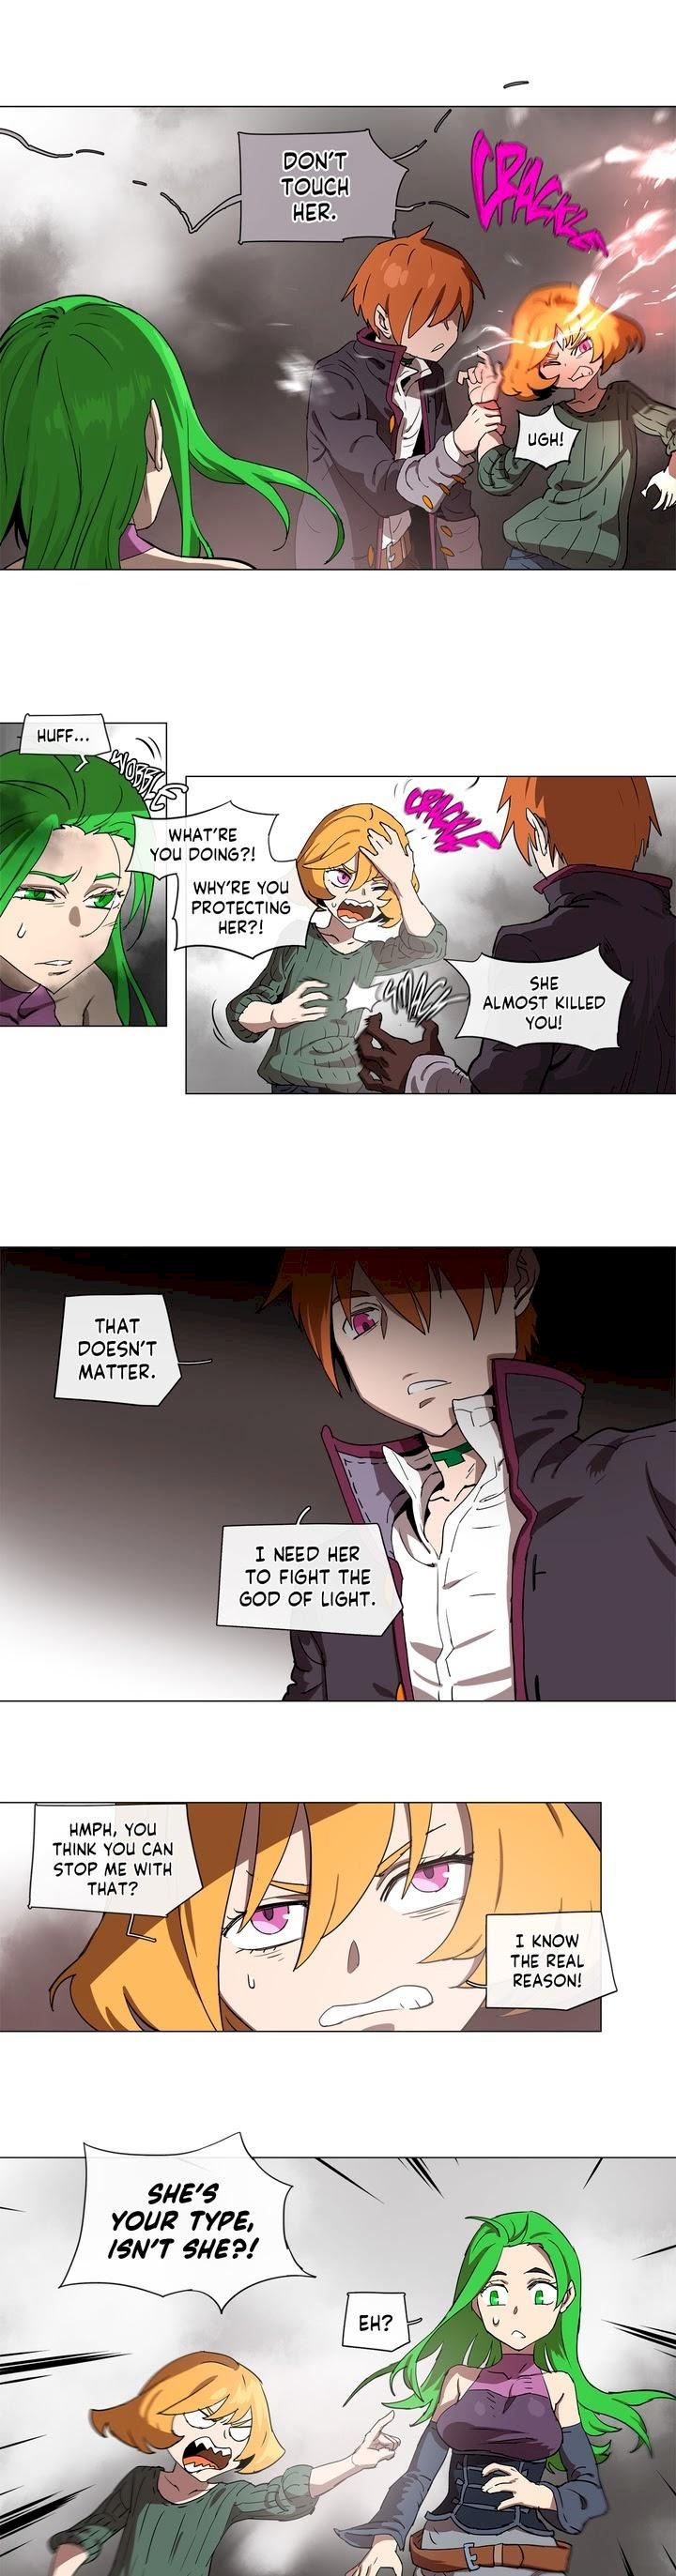 4 Cut Hero - Chapter 124 Page 7